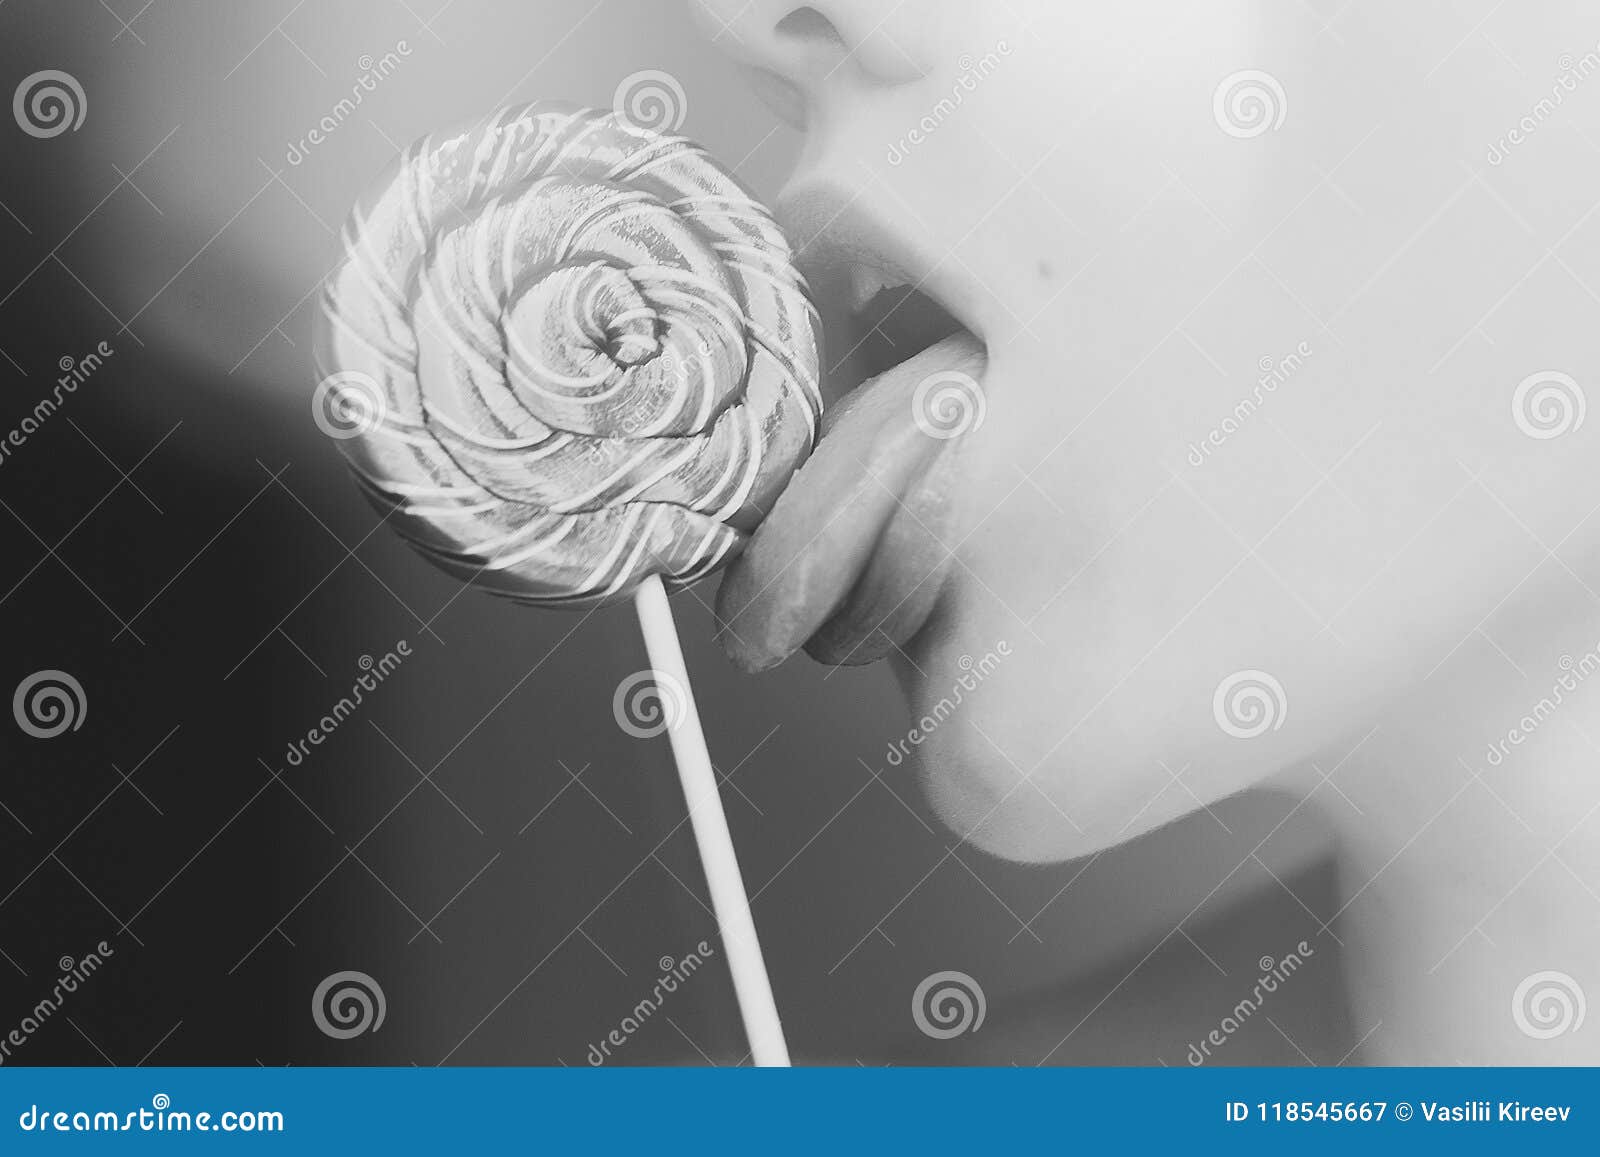 Seductive Female Licking Lollipop Stock Image - Image of candy, face ...